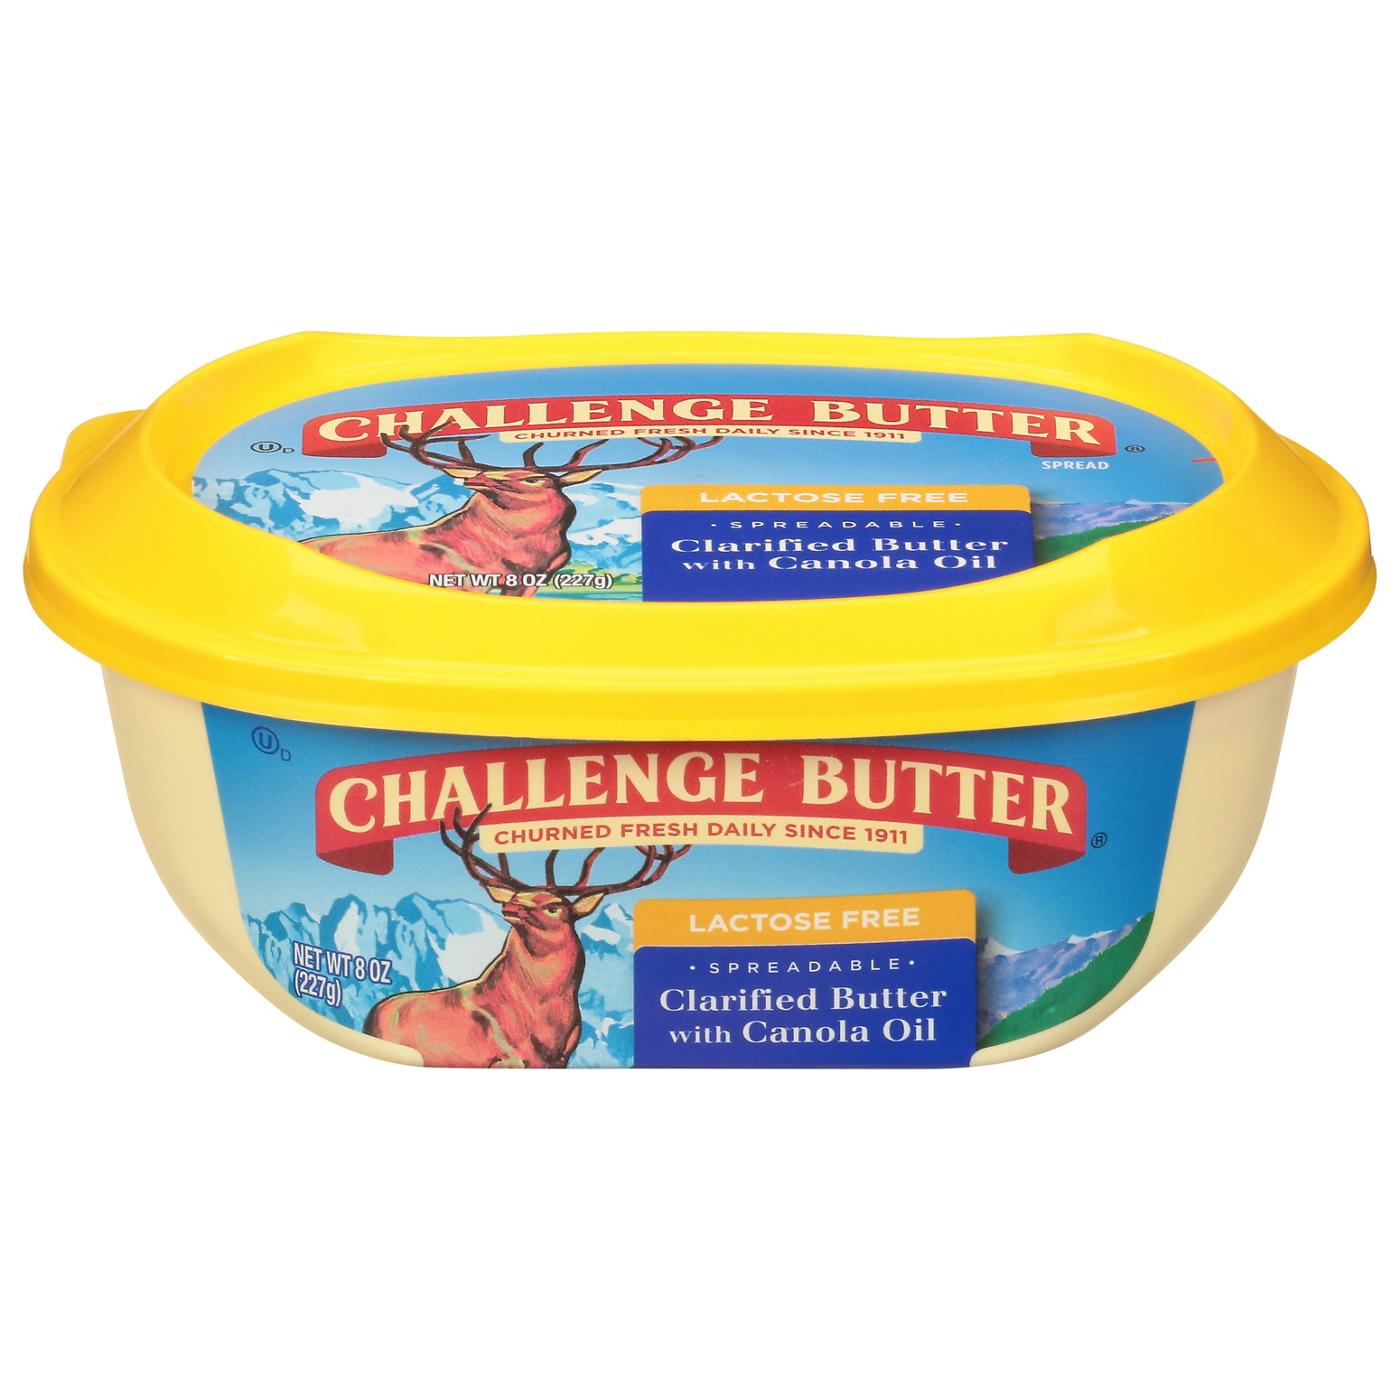 Challenge Lactose Free Spreadable Butter with Canola Oil; image 1 of 3